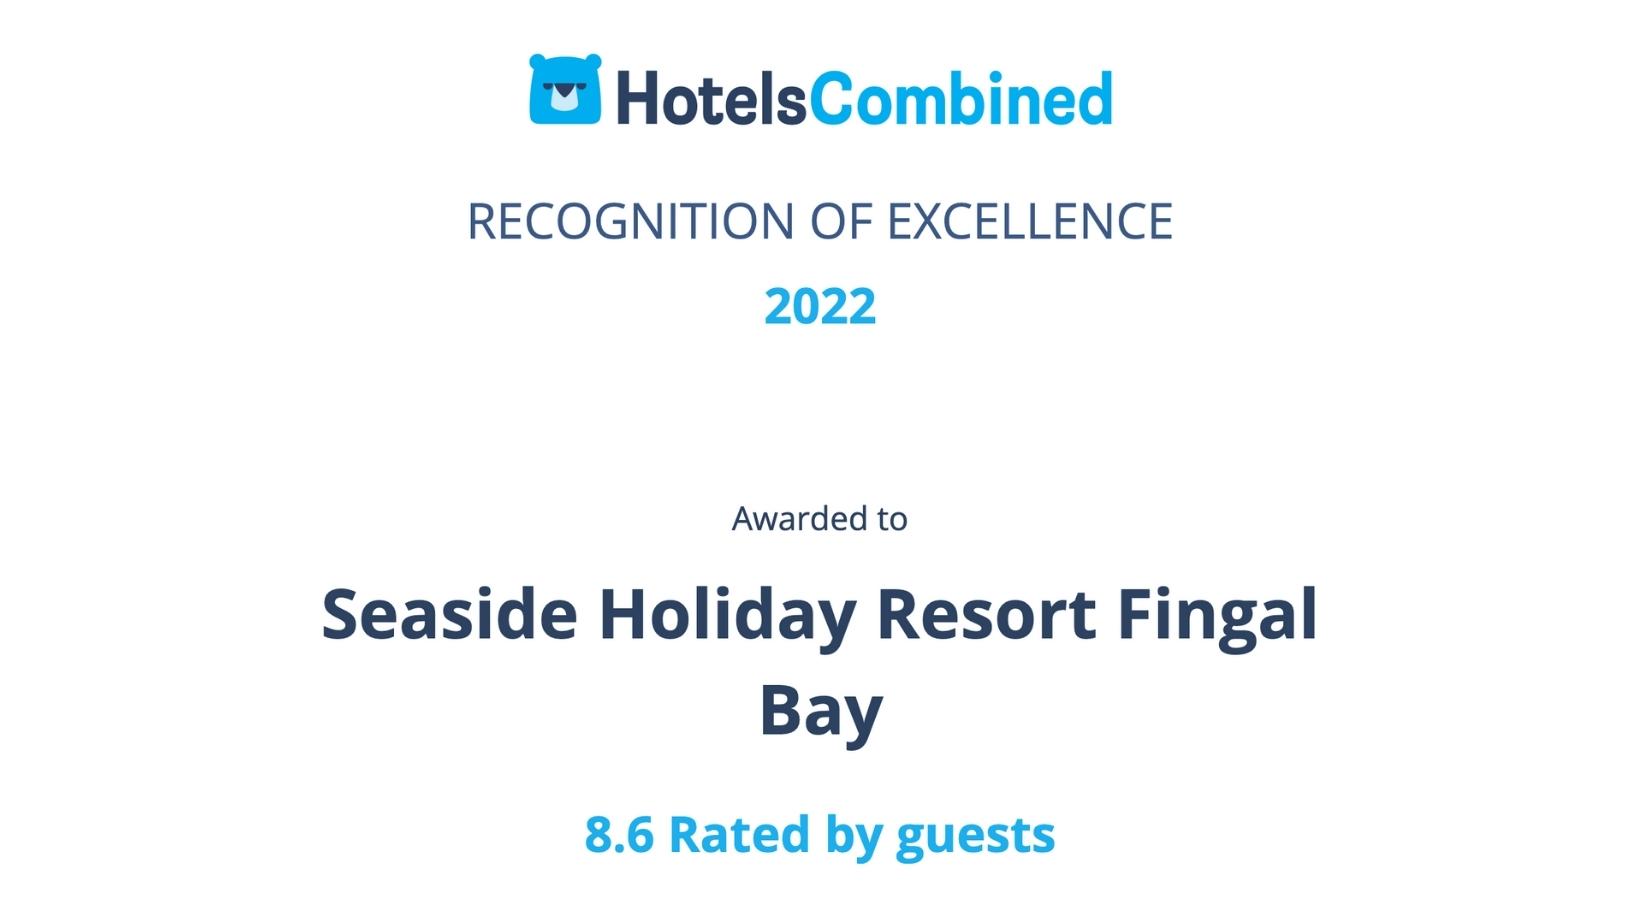 Seaside Holiday Resort in Port Stephens Fingal Bay receives a Recognition of Excellence Award for 2022 from HotelsCombined